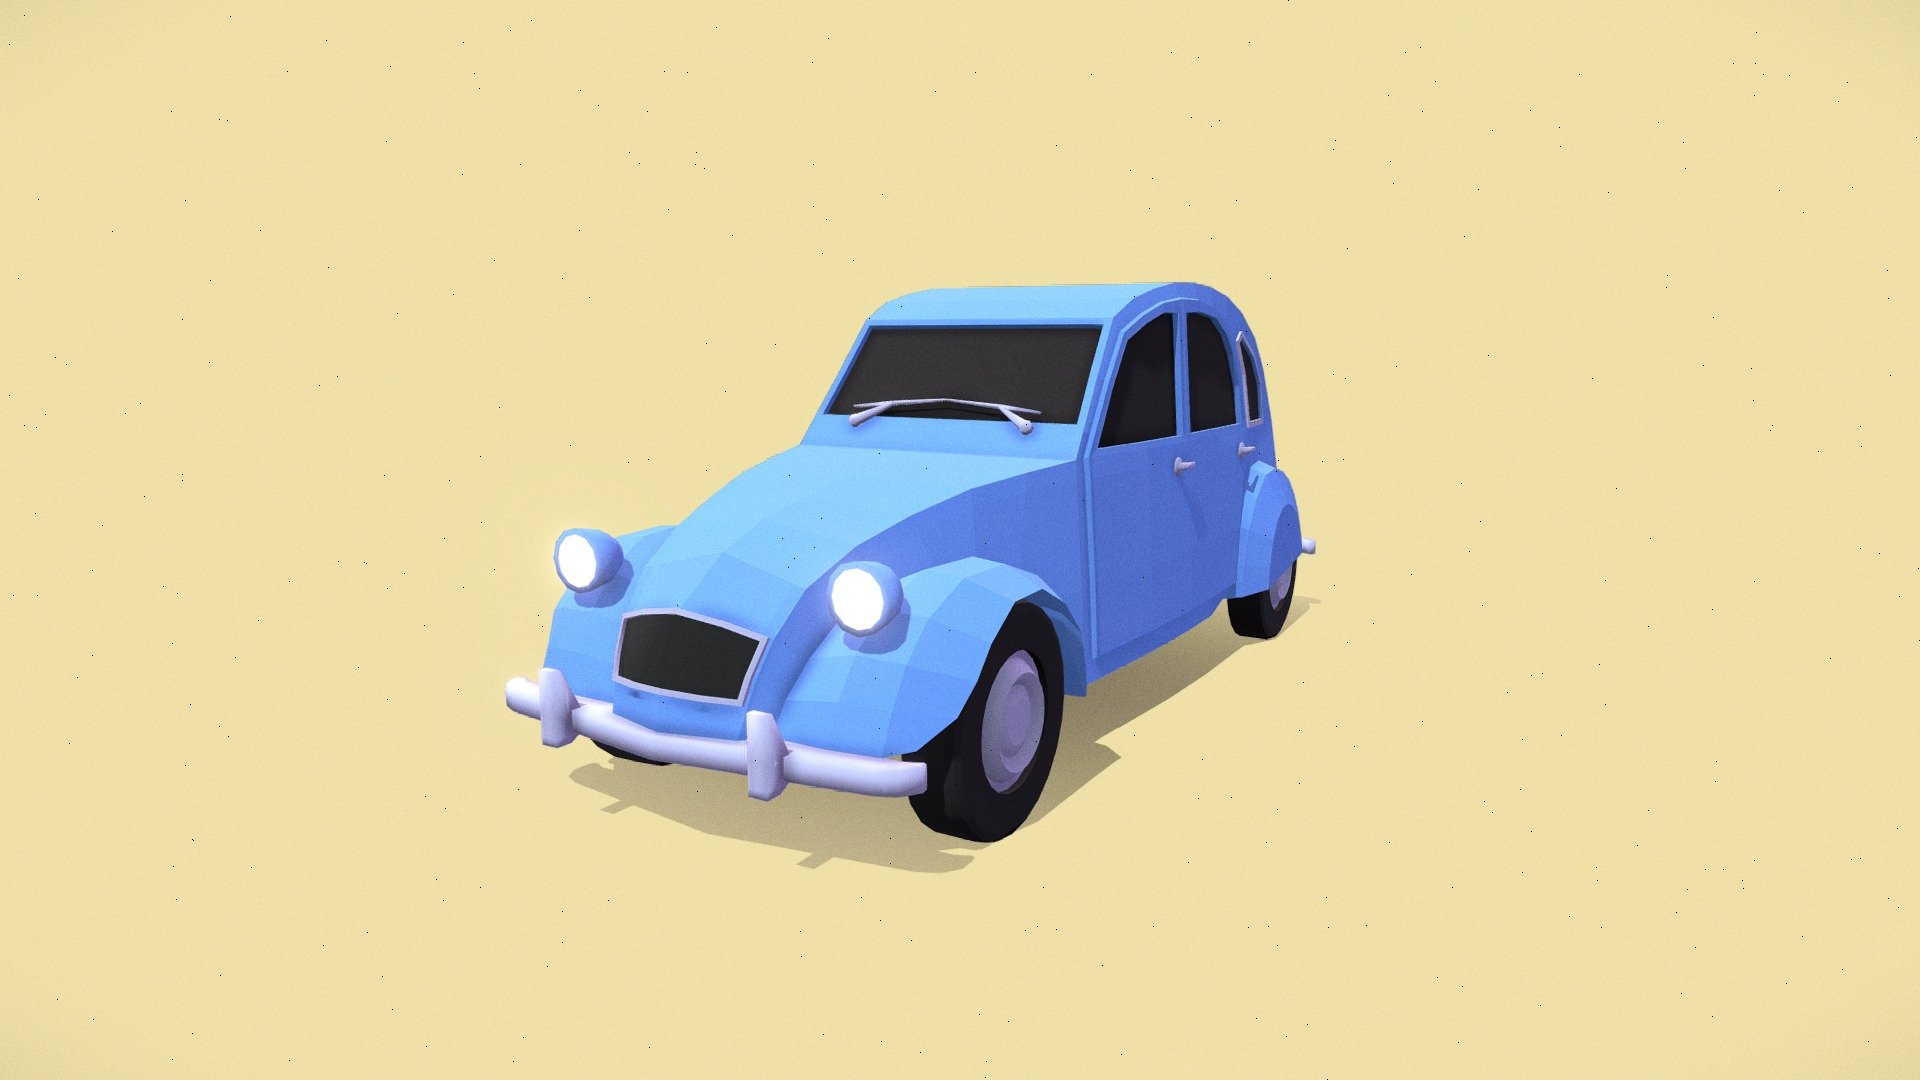 This is a free cartoon Low Poly style car.
* The model supports mobile devices Unity or UE4
In the future I will publish a lot of free models, rate and write a comment to promote my account ;) - FREE Retro France Car Cartoon (Low Poly) - Download Free 3D model by Moonlight (@moonlight2023) 3d model